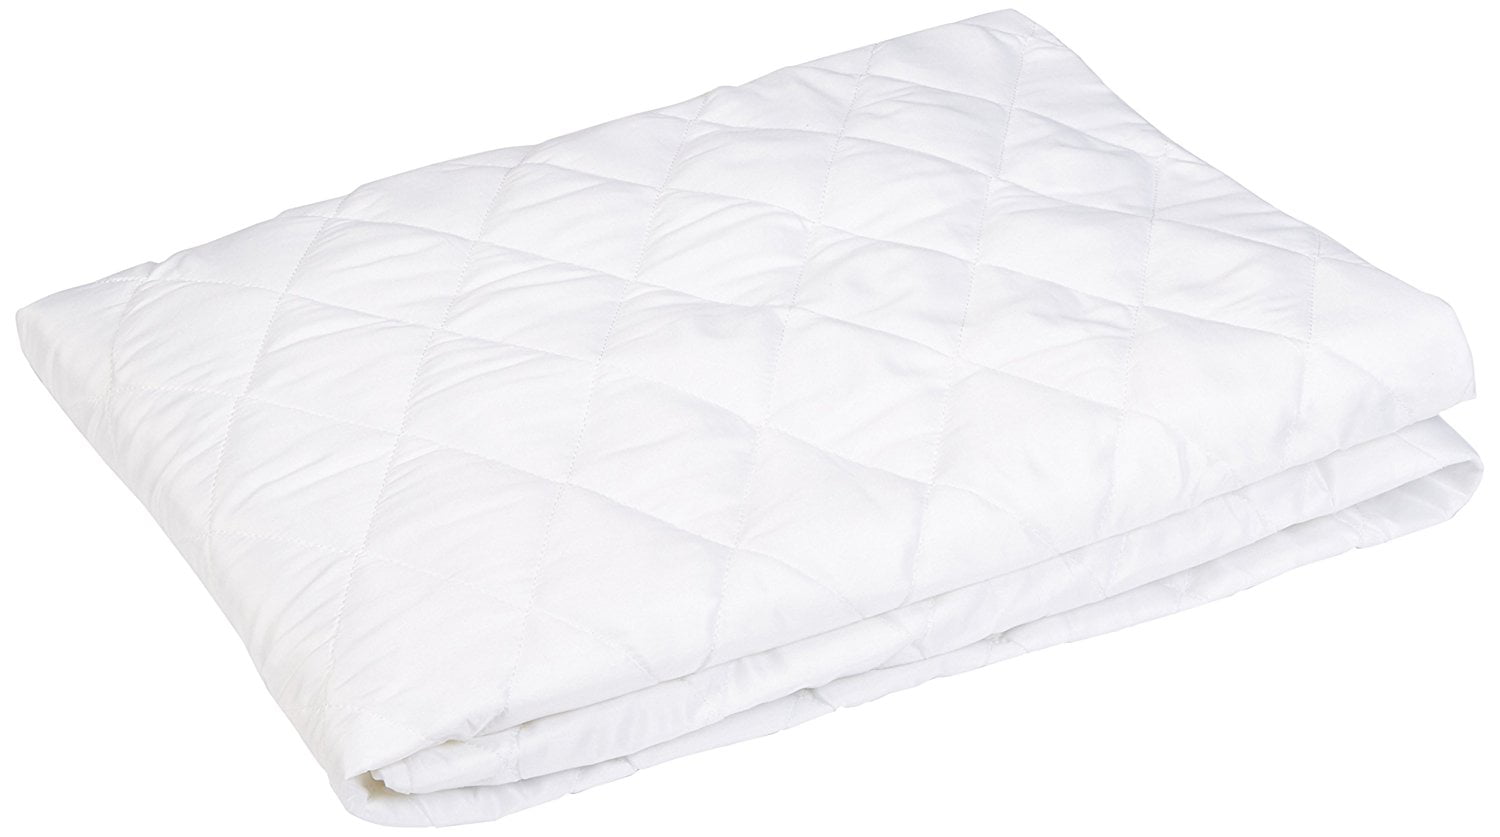 Silvasleep Hypoallergenic Antimicrobial Quilted Mattress Pad